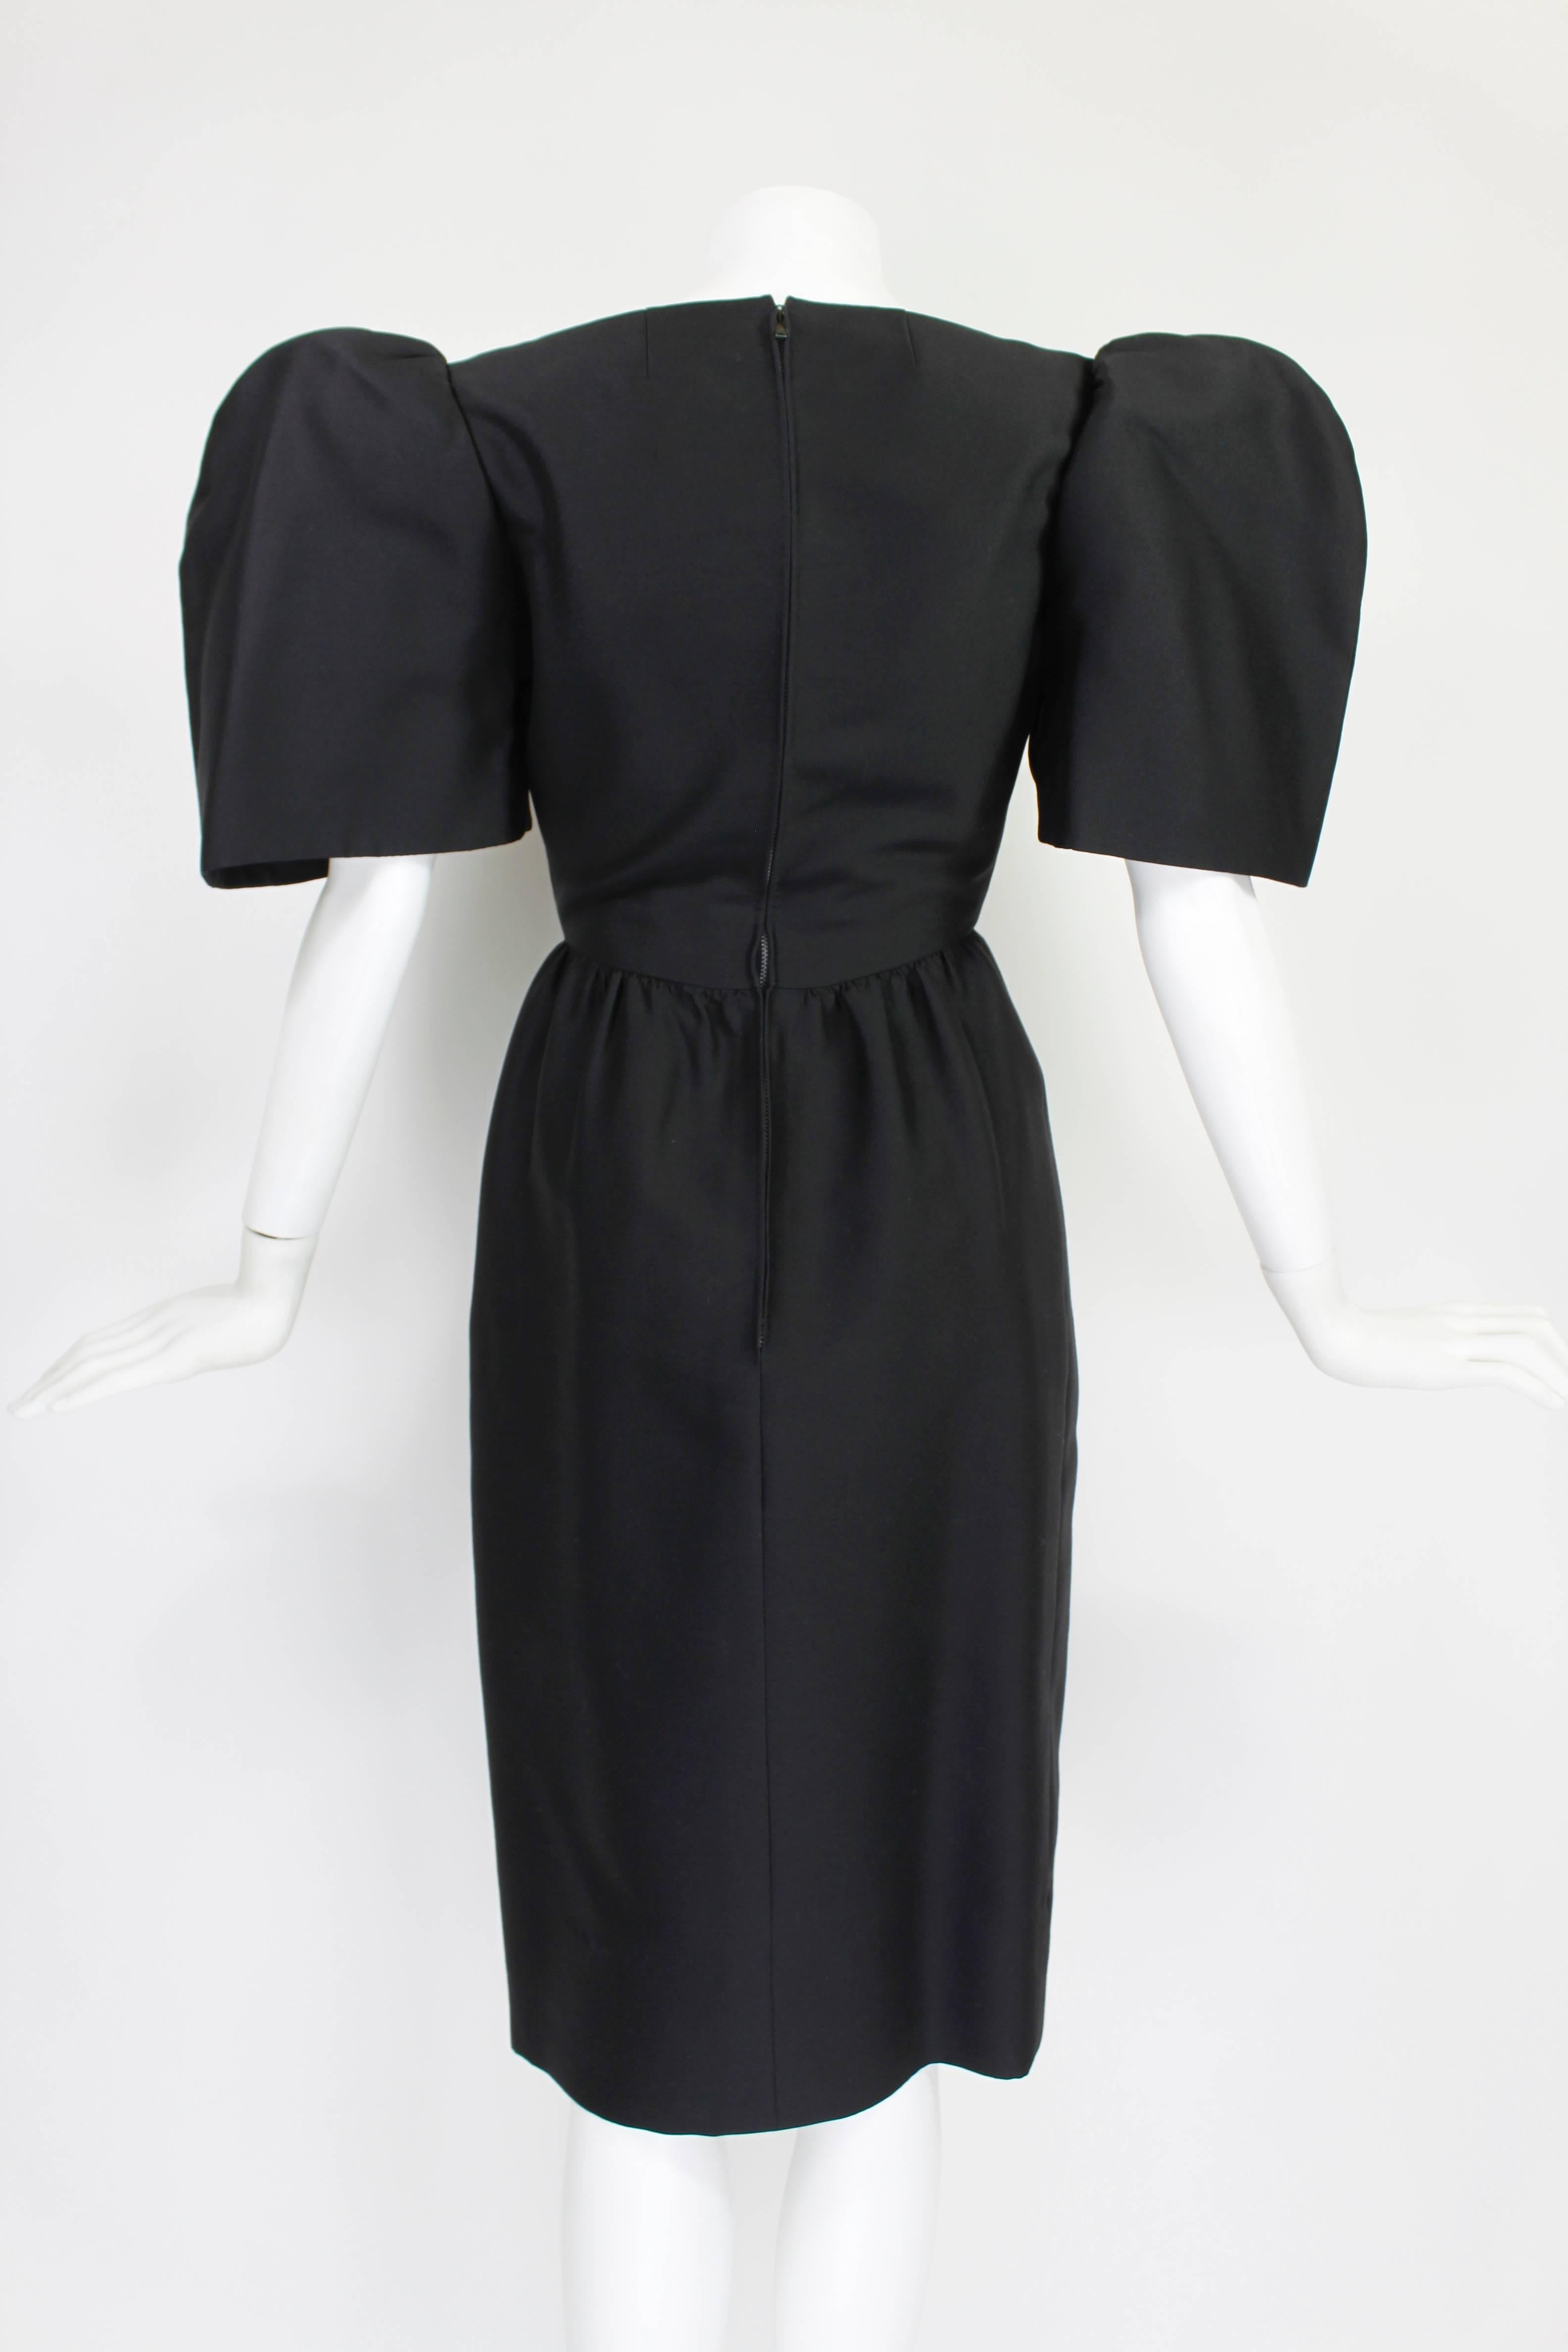 Women's Late 1950s Galanos Architectural Cocktail Dress